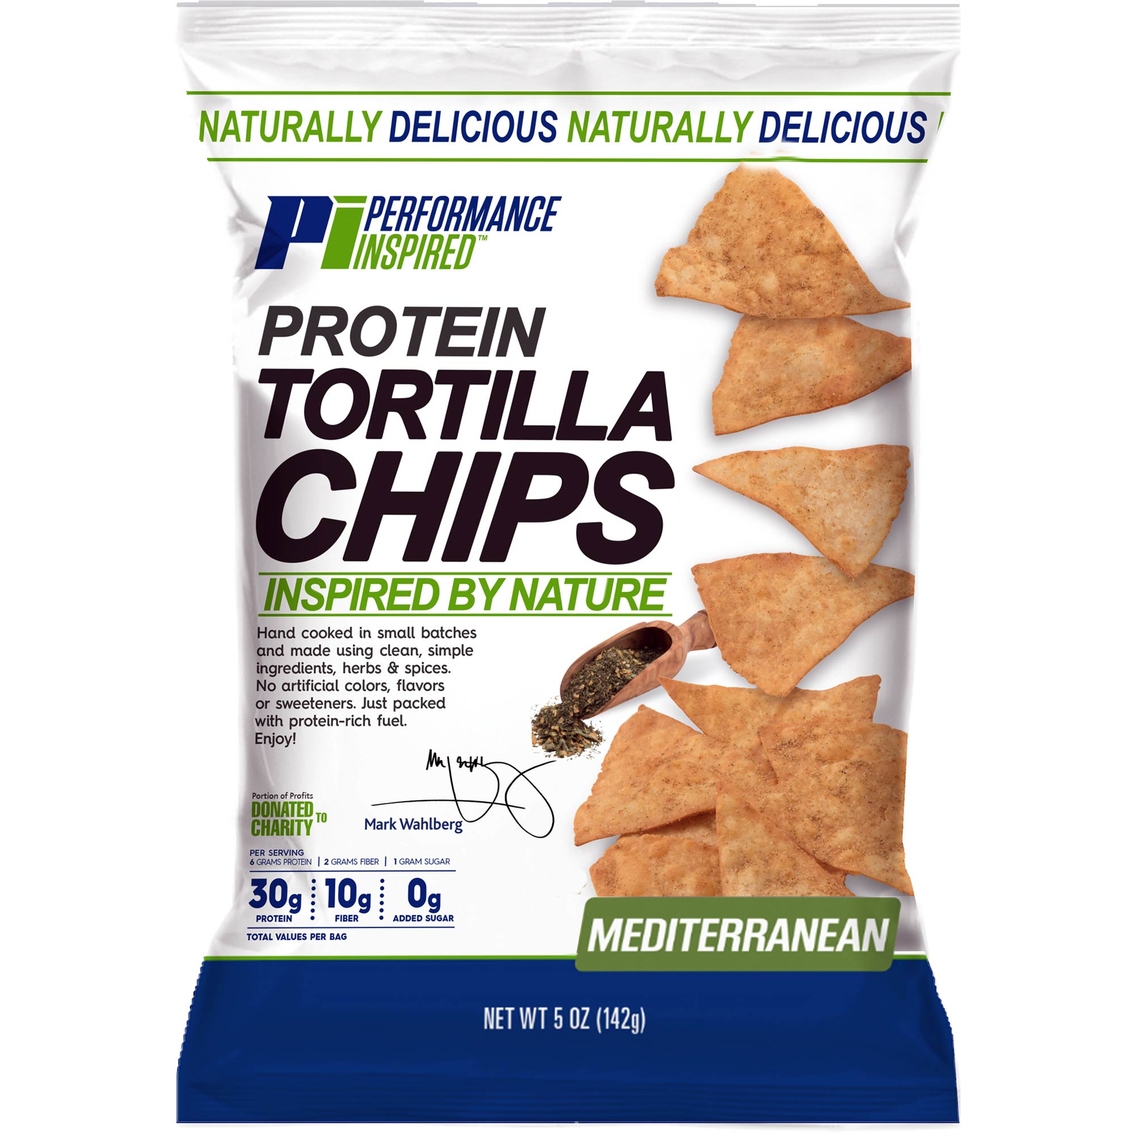 Performance Inspired Protein Tortilla Chips 5 oz. - Image 1 of 2